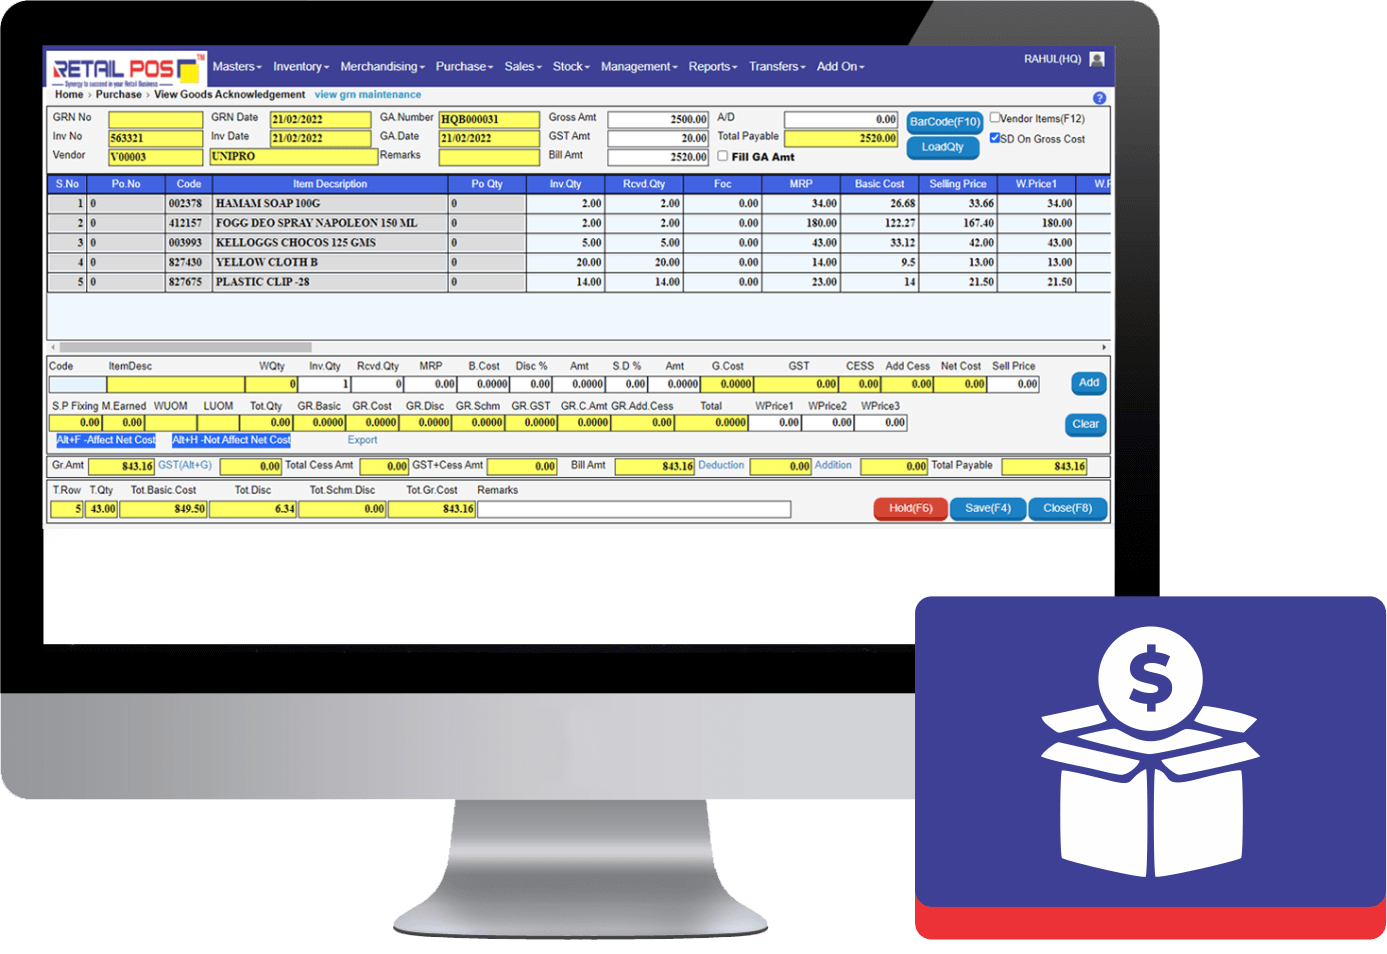 Purchase Management Screen from the Retail POS's Hypermarket Billing Software